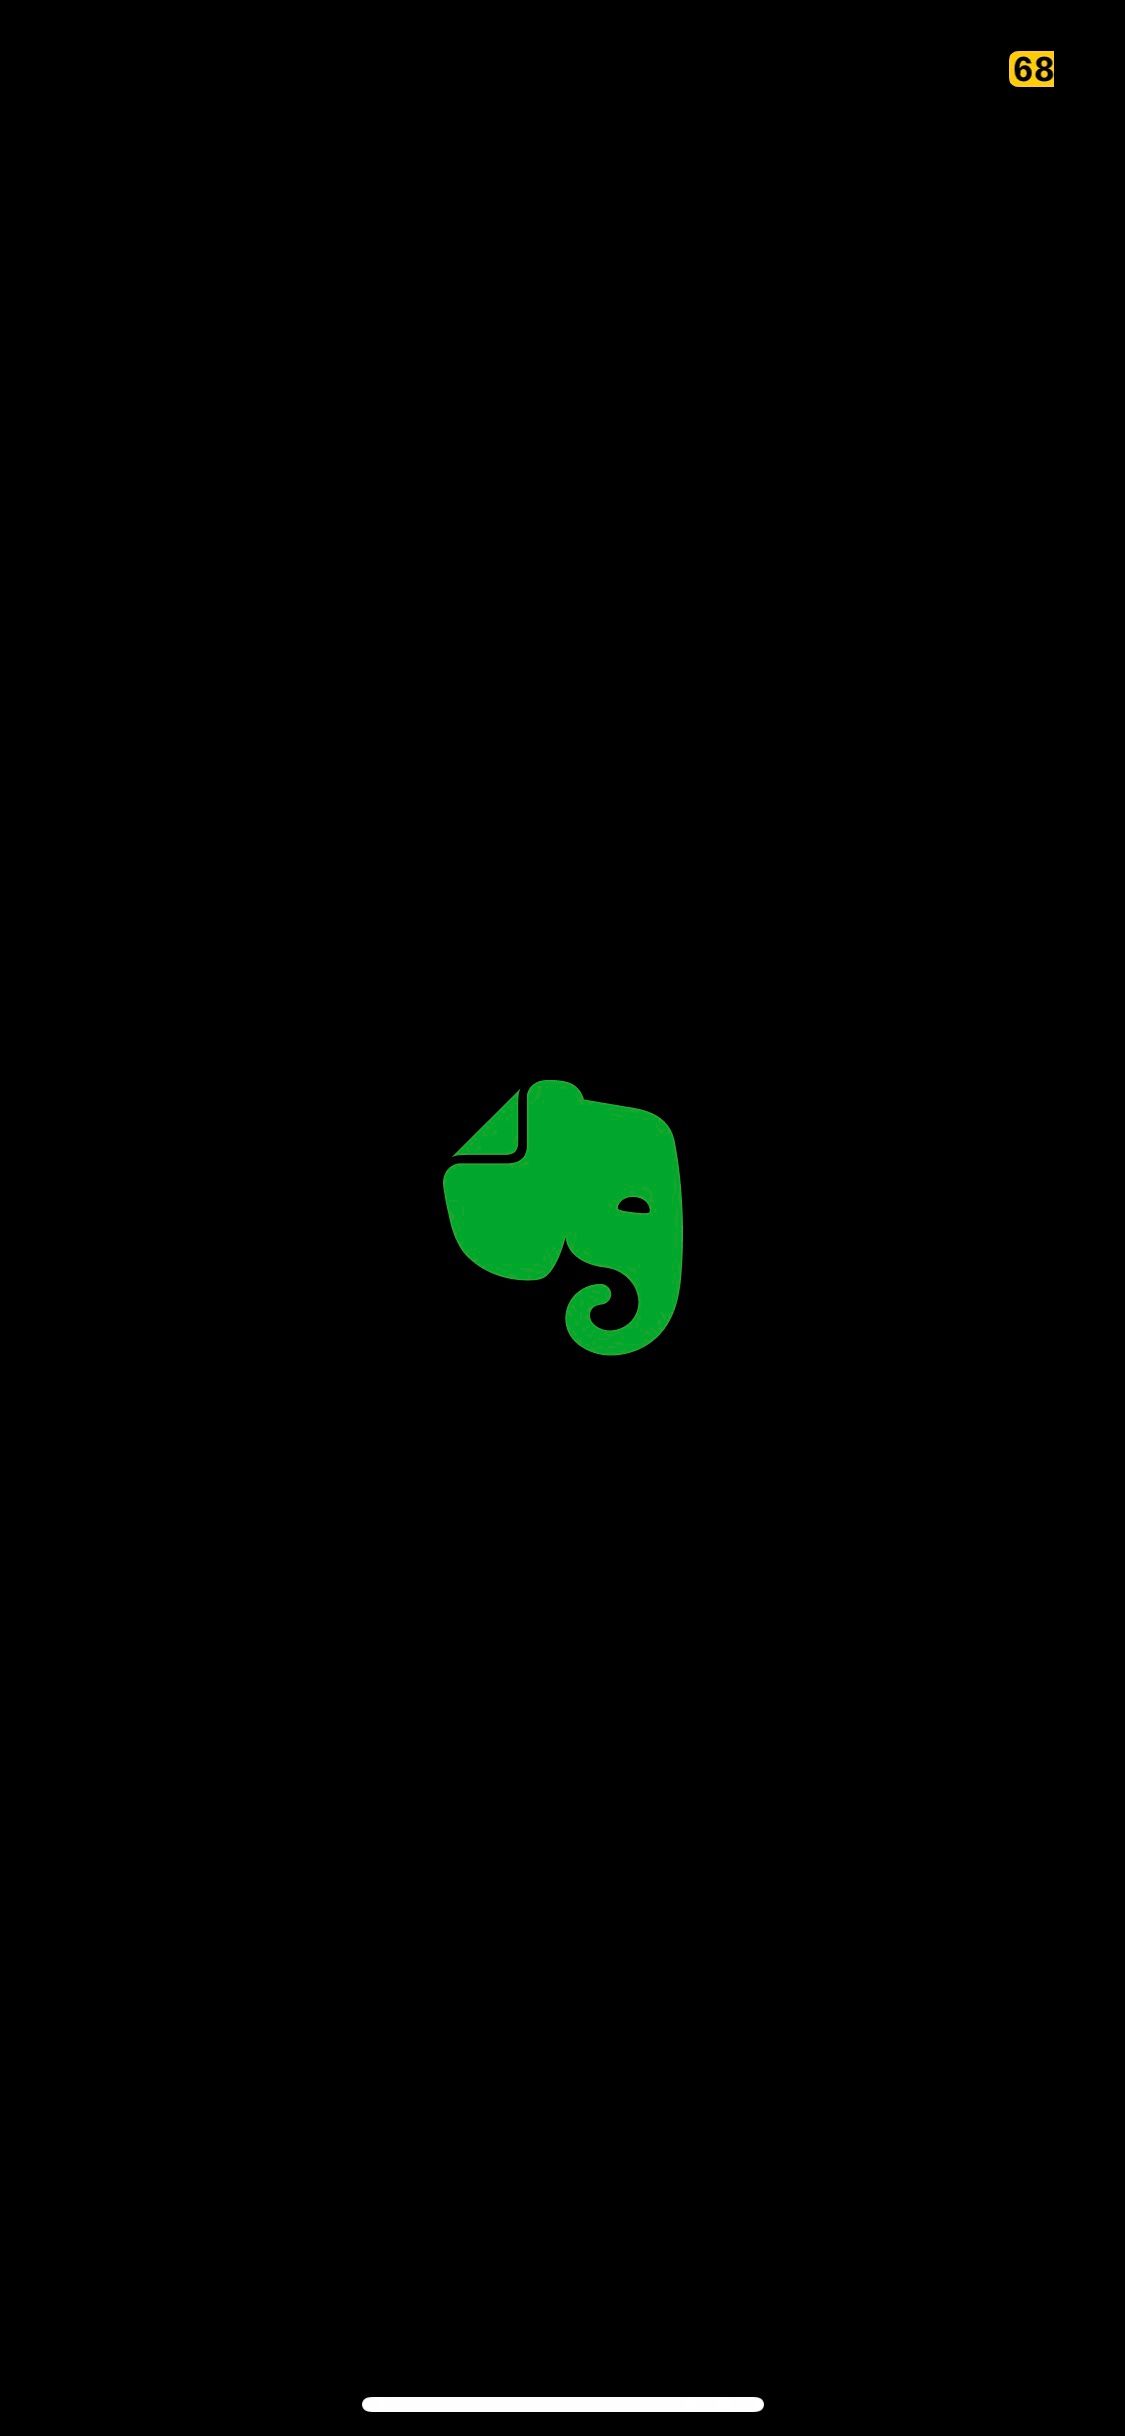 Evernote app loading screen on iOS